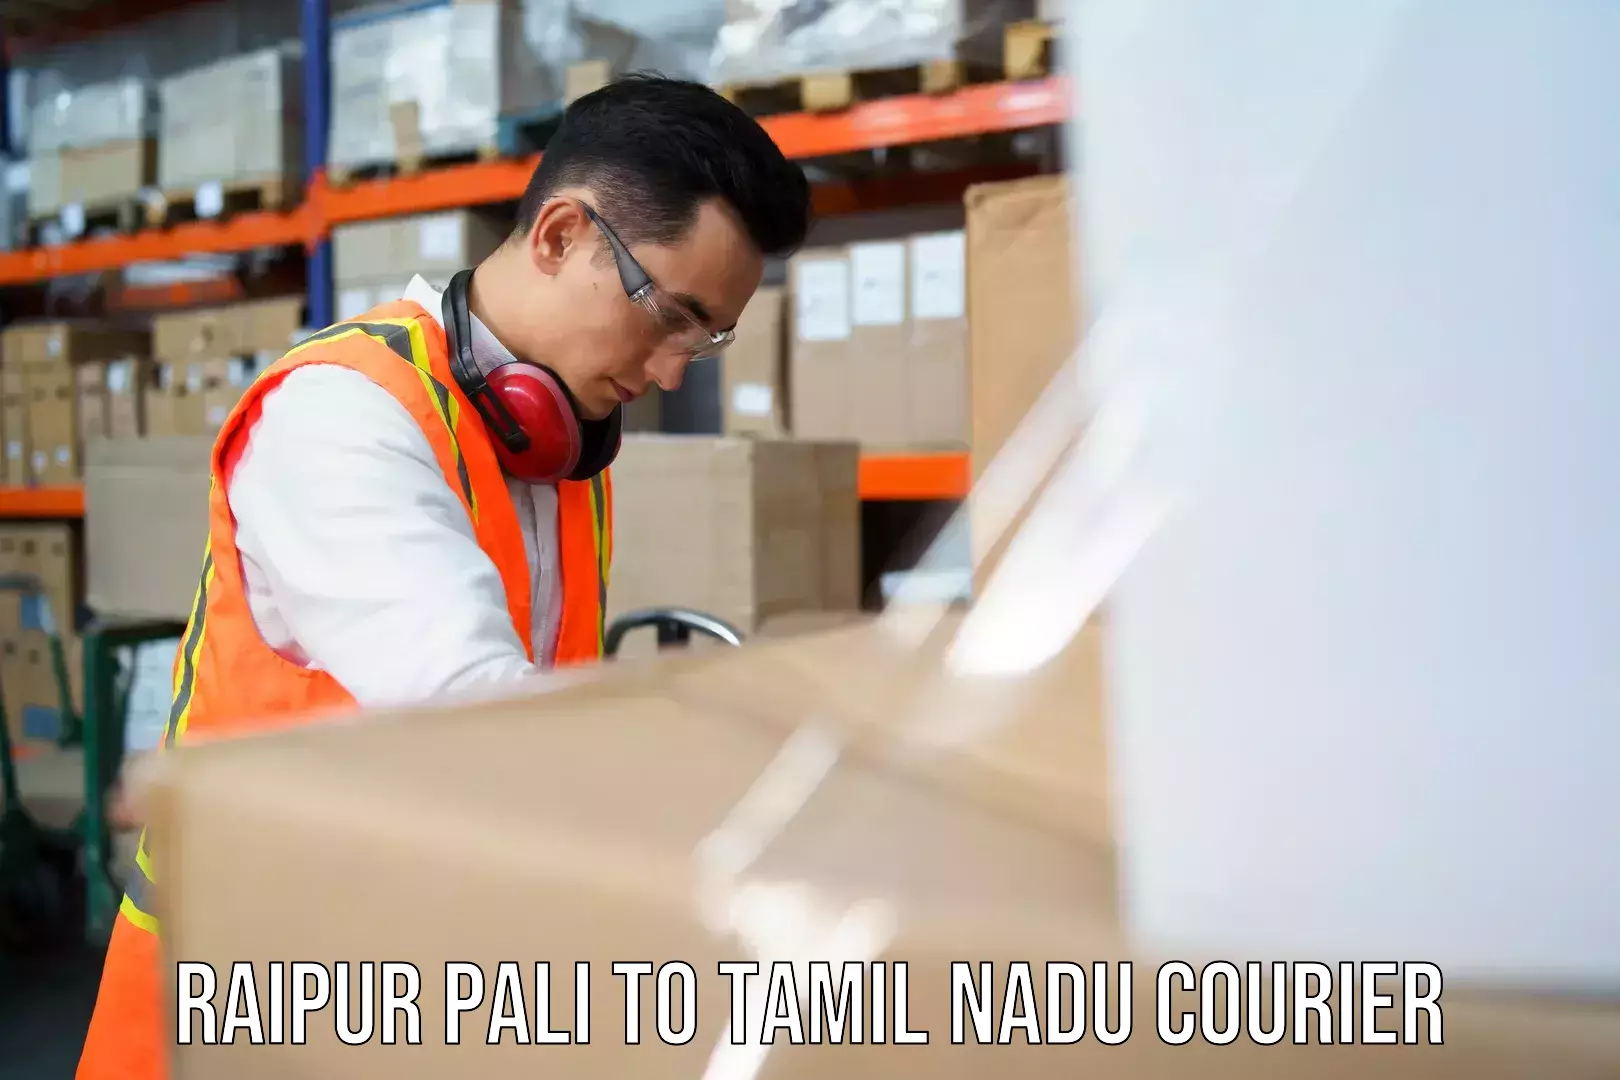 Next-day delivery options Raipur Pali to Chennai Port